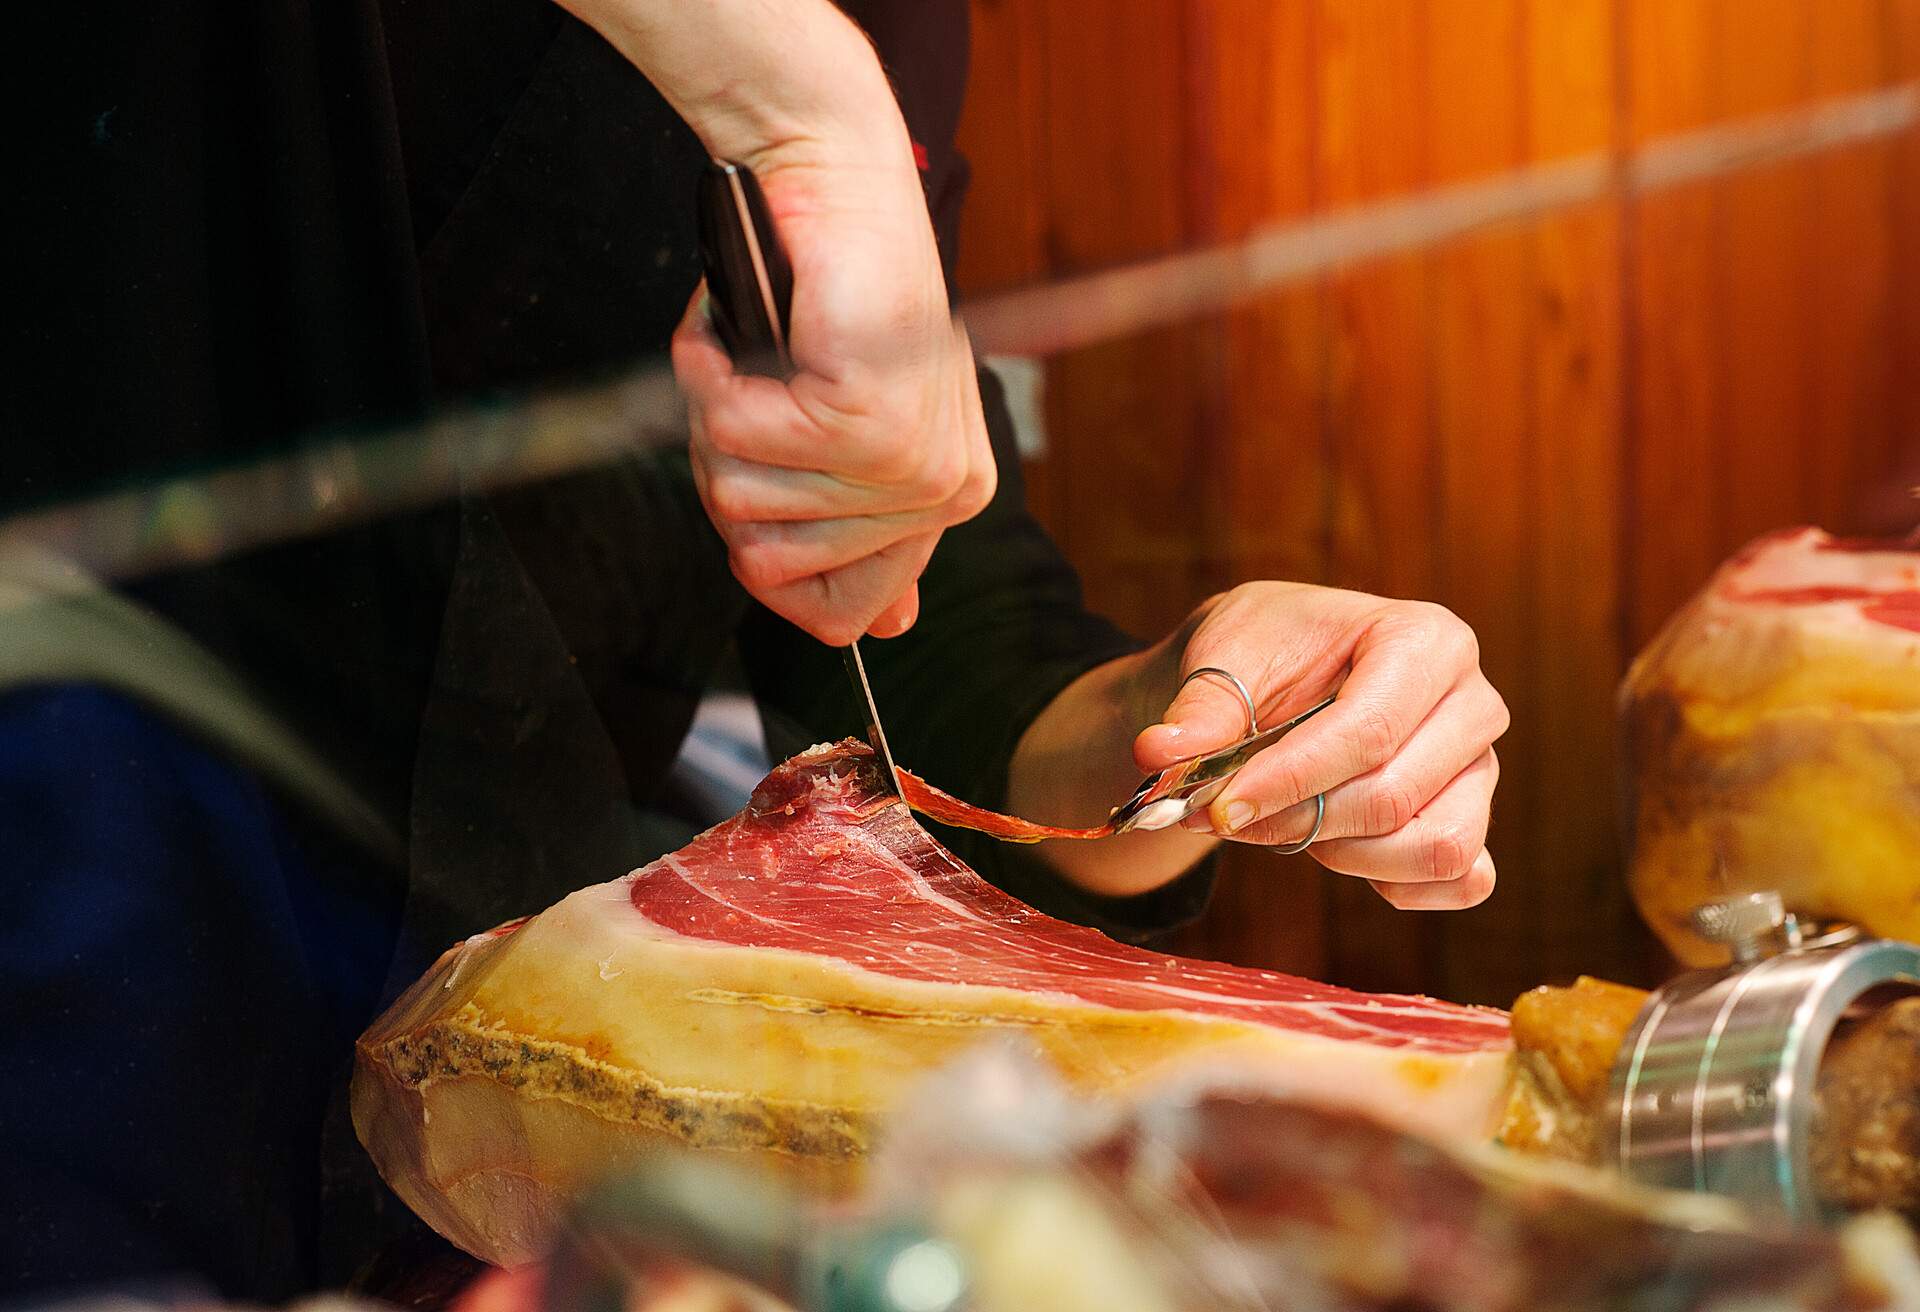 Jamón being cut in thin slices ready to eat by a Caucasian man Valencia Spain